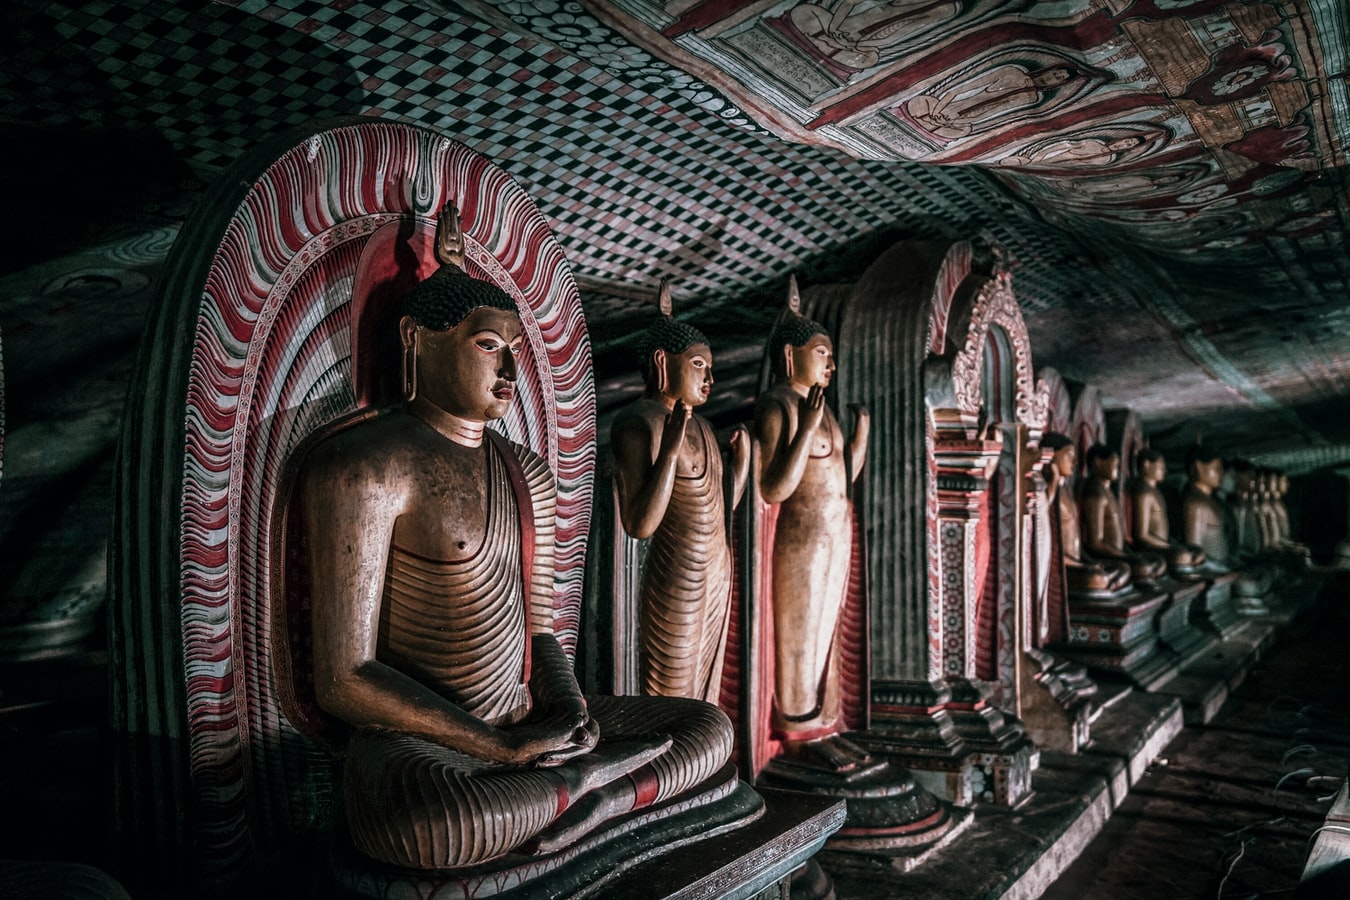 Dambulla Sri Lanka - Cave Temple Asia - What to see - Travel and Home